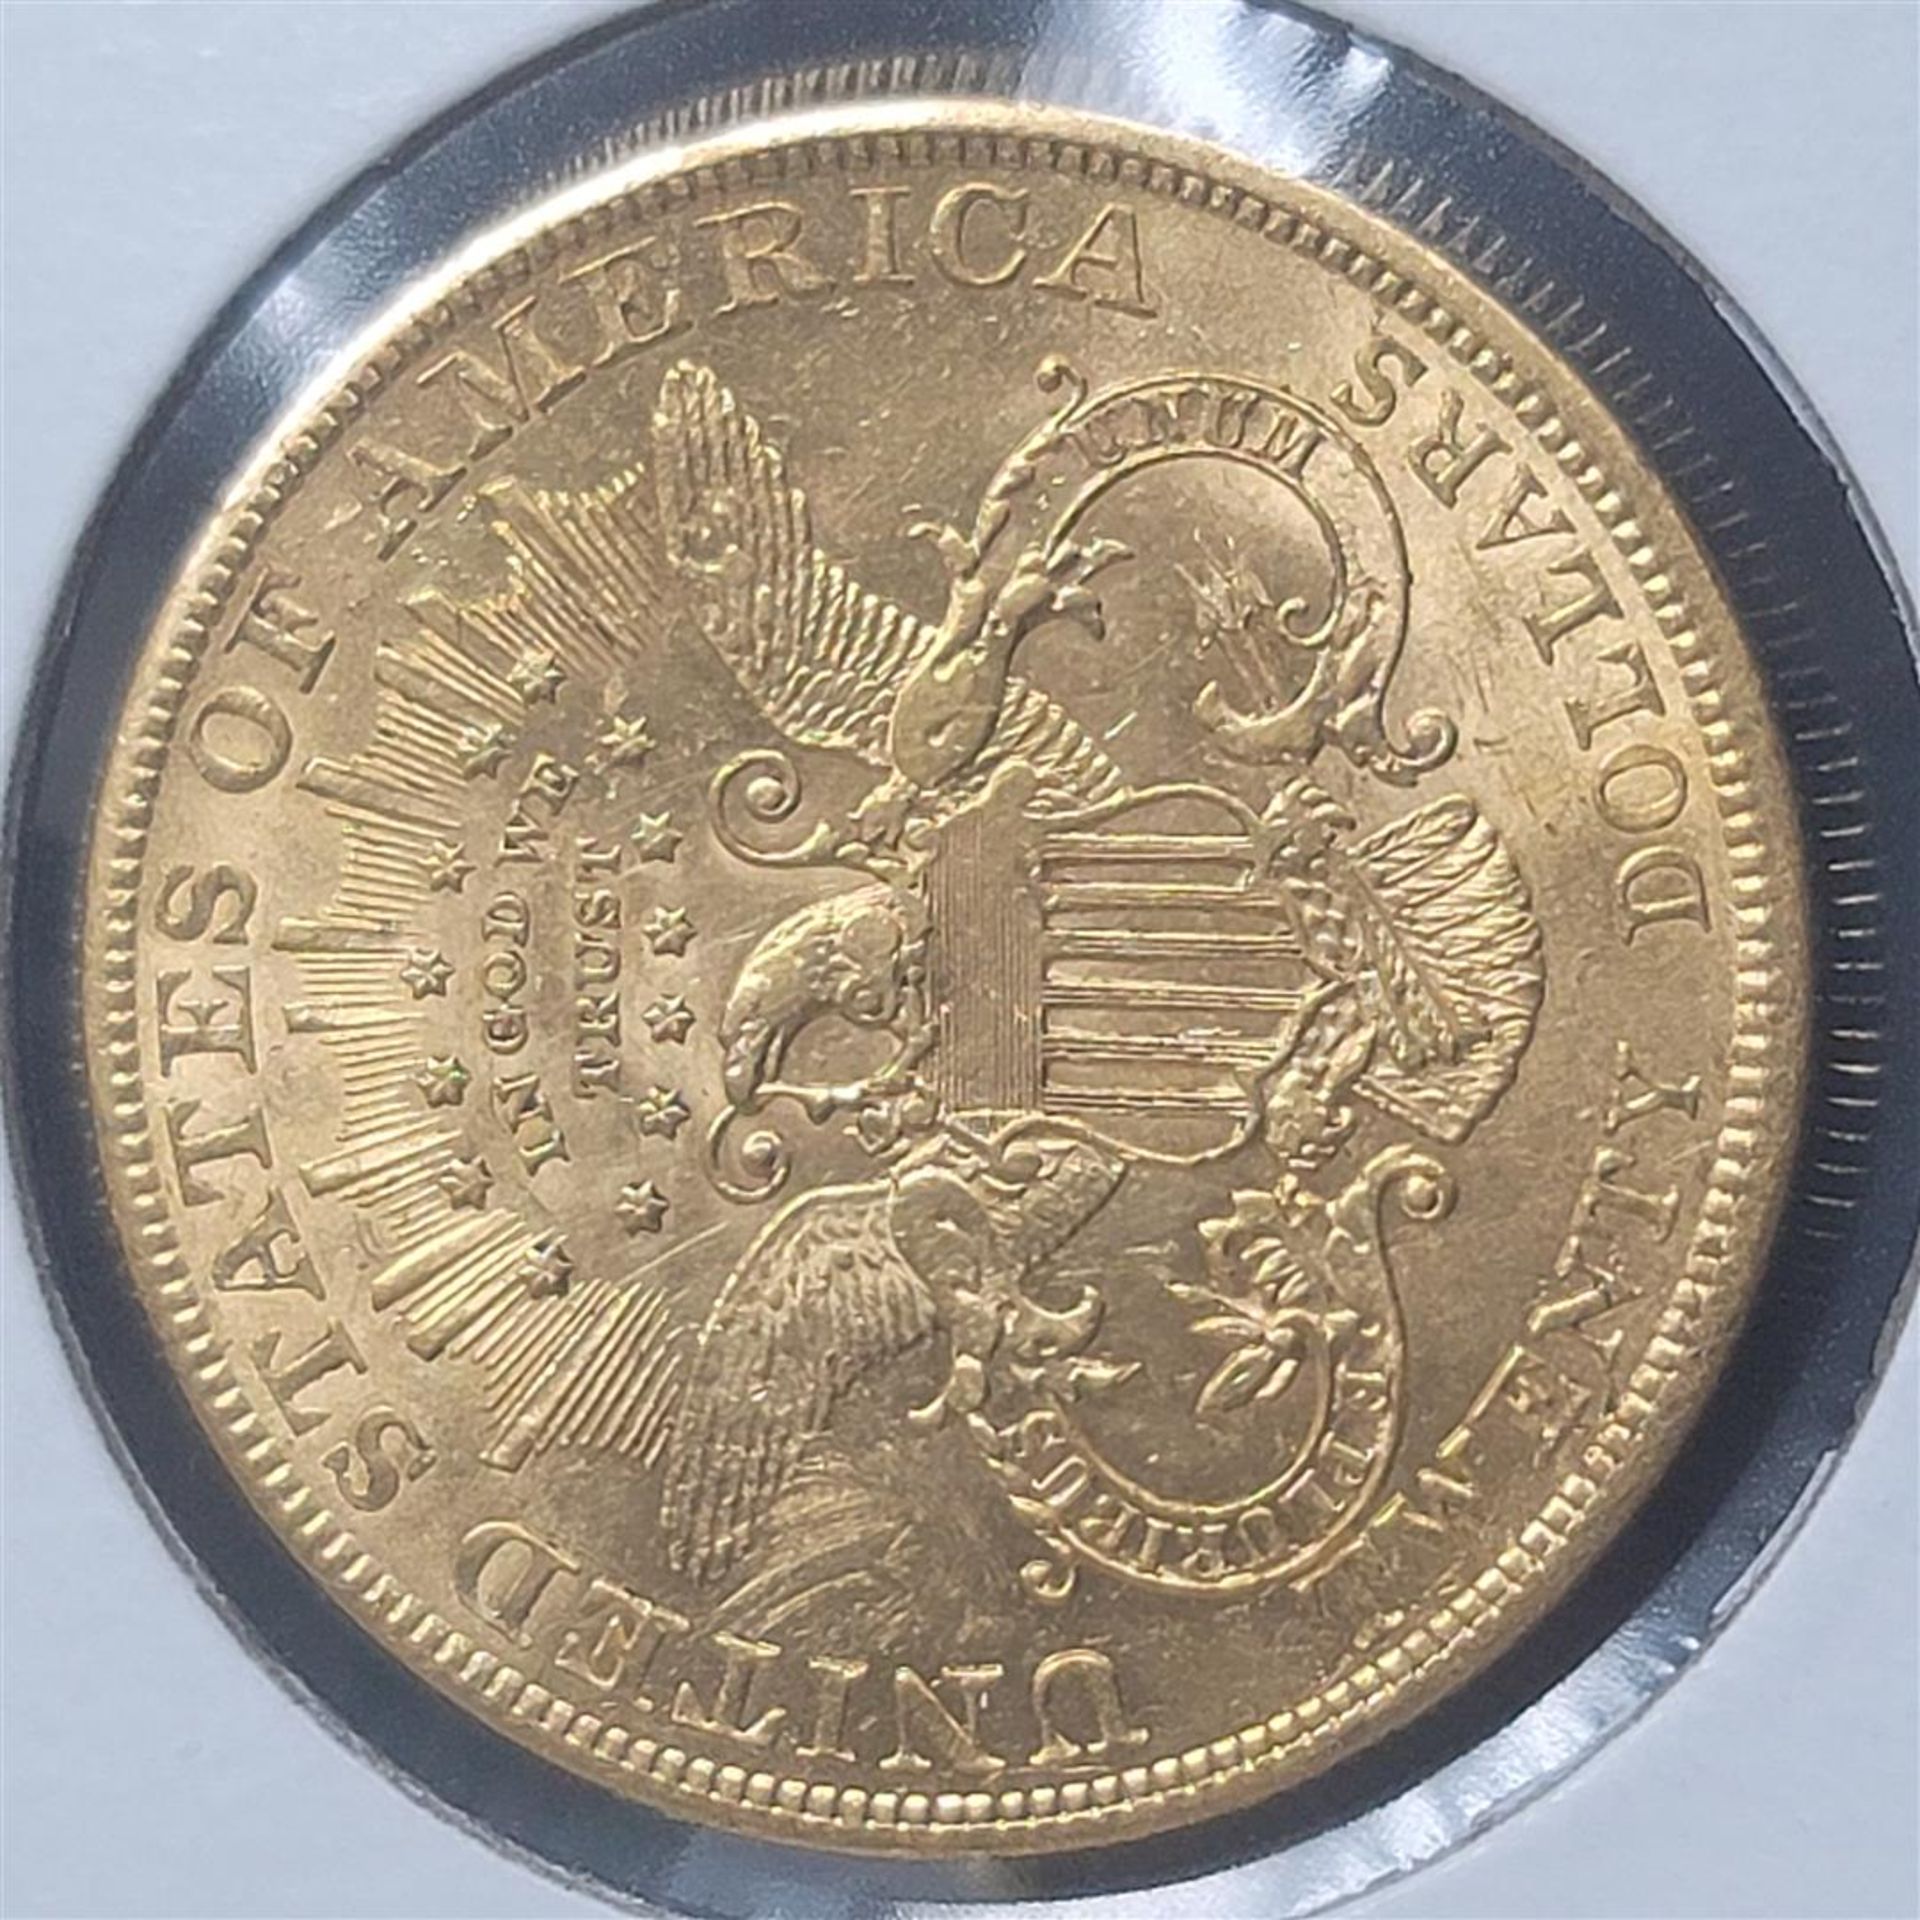 1904 20$ Liberty Head Double Eagle Gold Coin BU - Image 2 of 2